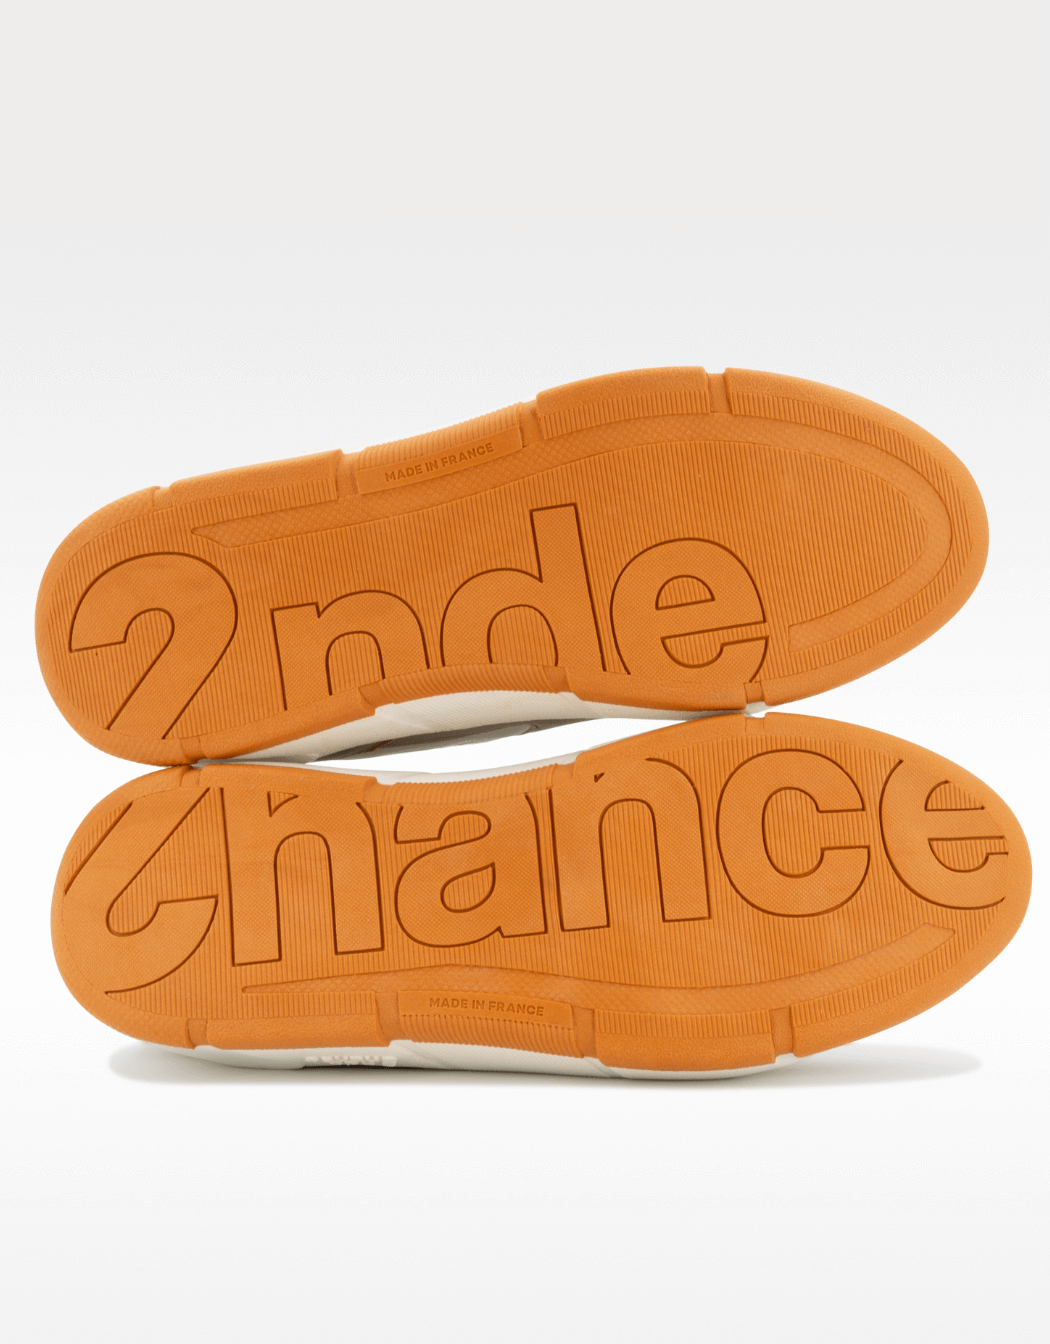 sneakers-neo-loopr3-2ndechance-camel-recyclees-recyclable-madeinfrance-semelles